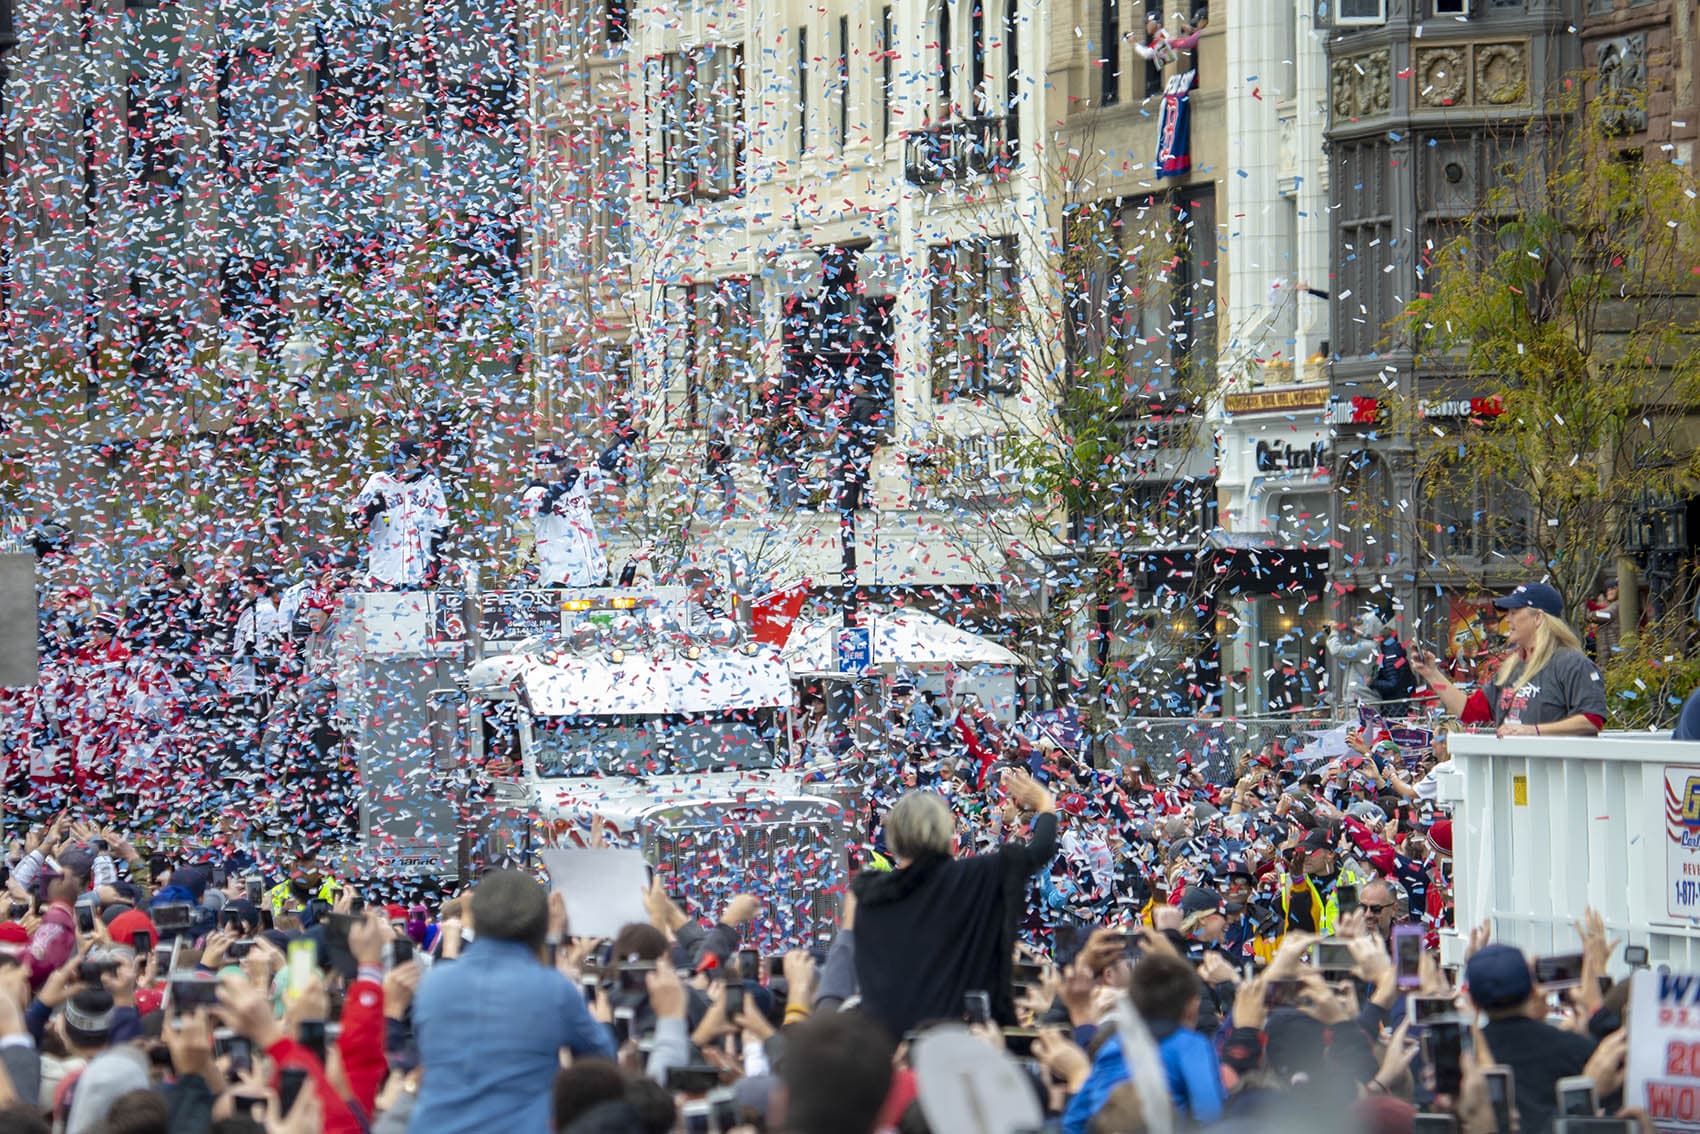 Red Sox World Series trophy coming to Island - The Martha's Vineyard Times